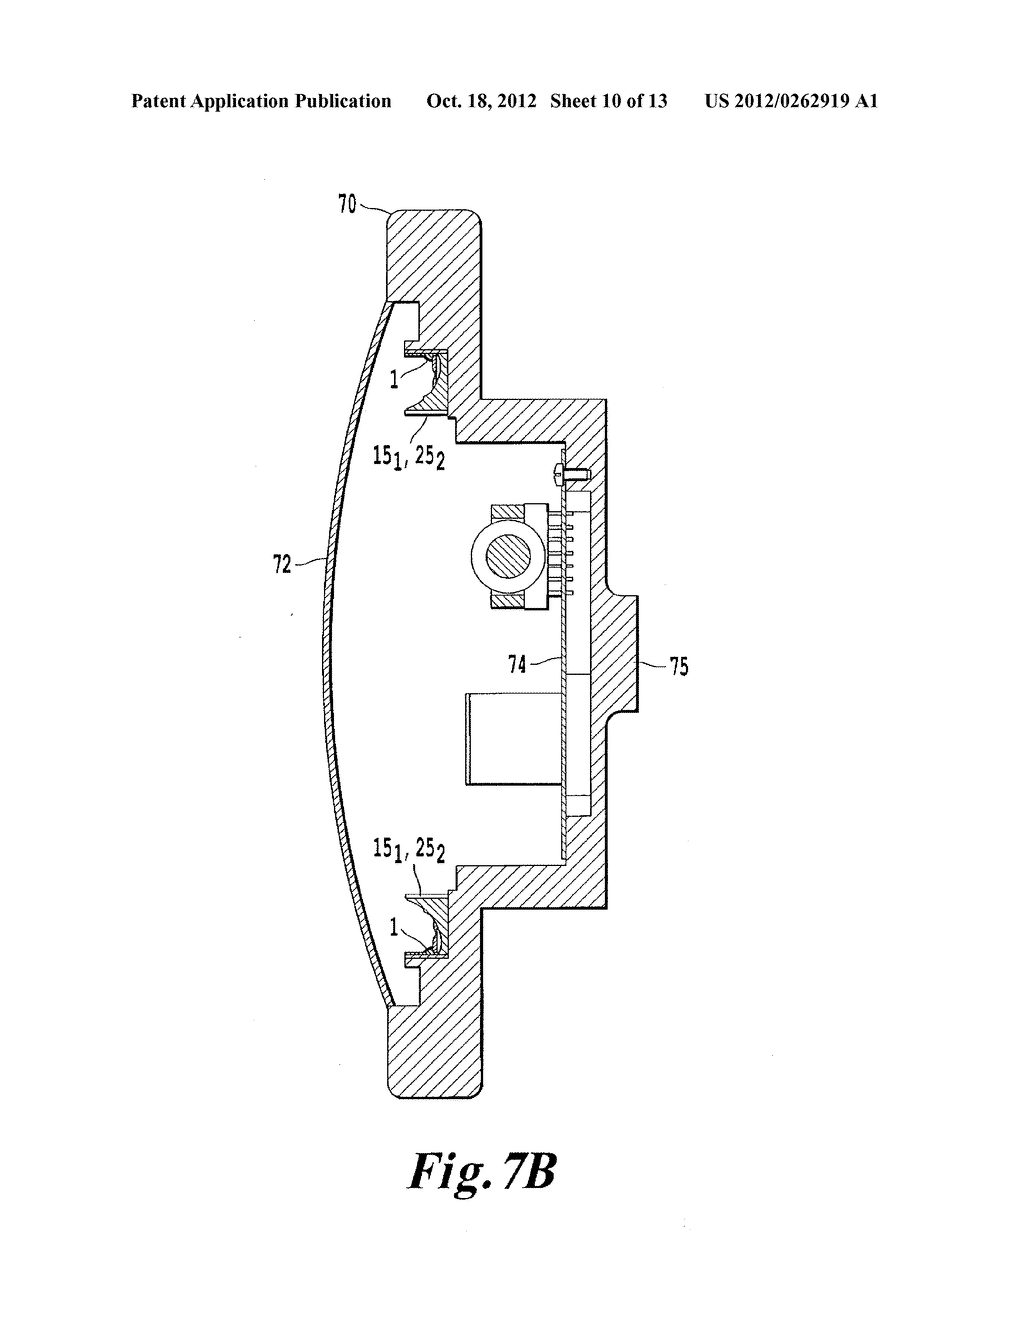 LED ILLUMINATION DEVICE WITH A HIGHLY UNIFORM ILLUMINATION PATTERN - diagram, schematic, and image 11